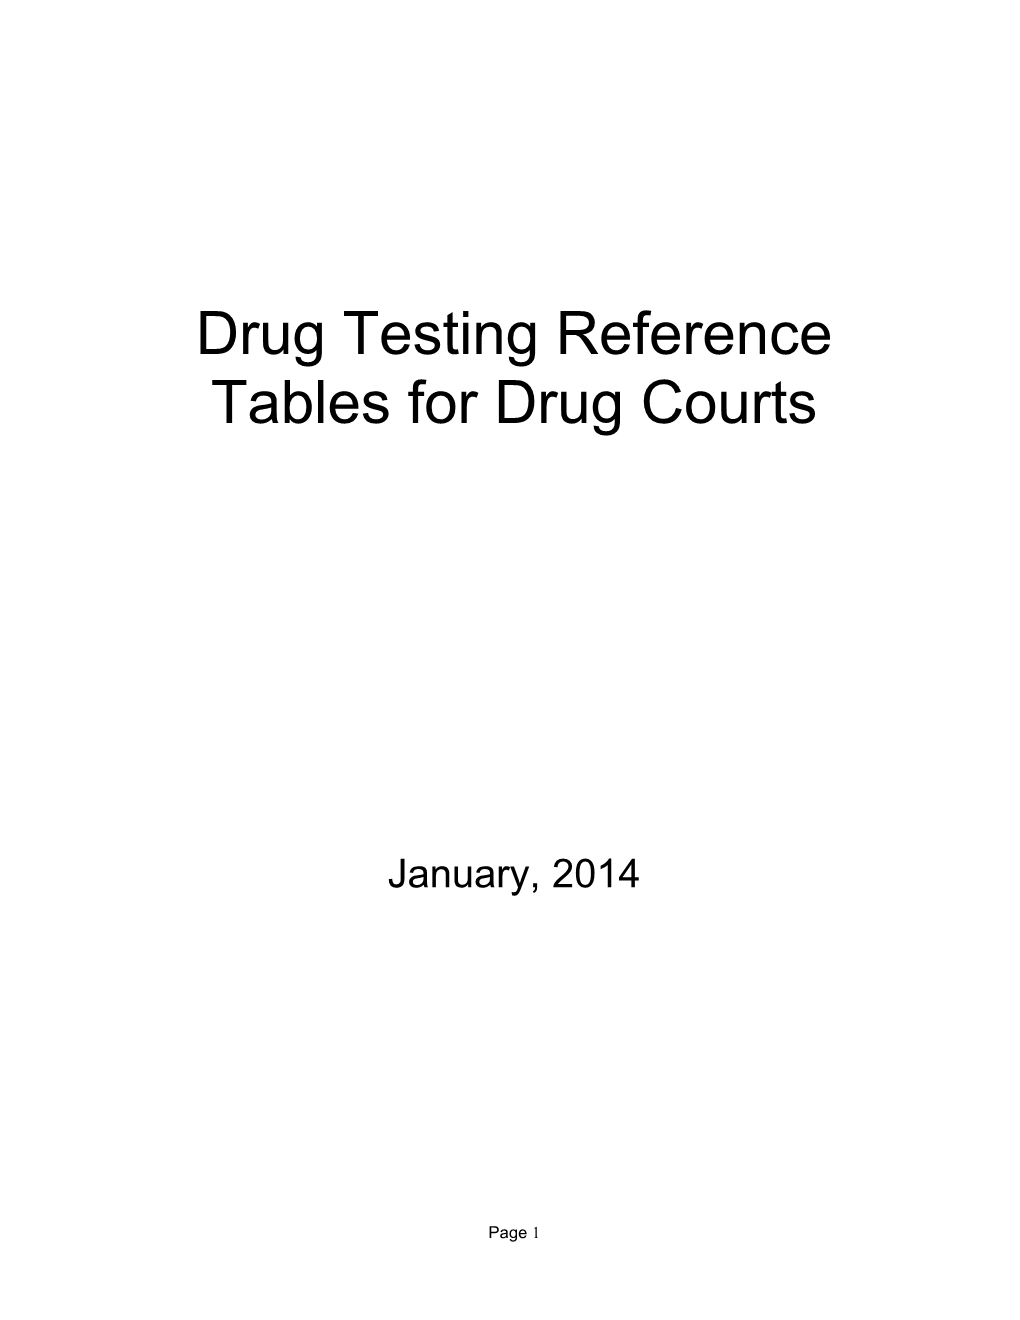 Effective Client Abstinence Monitoring Via Drug Testing Is Essential to the Overall Success